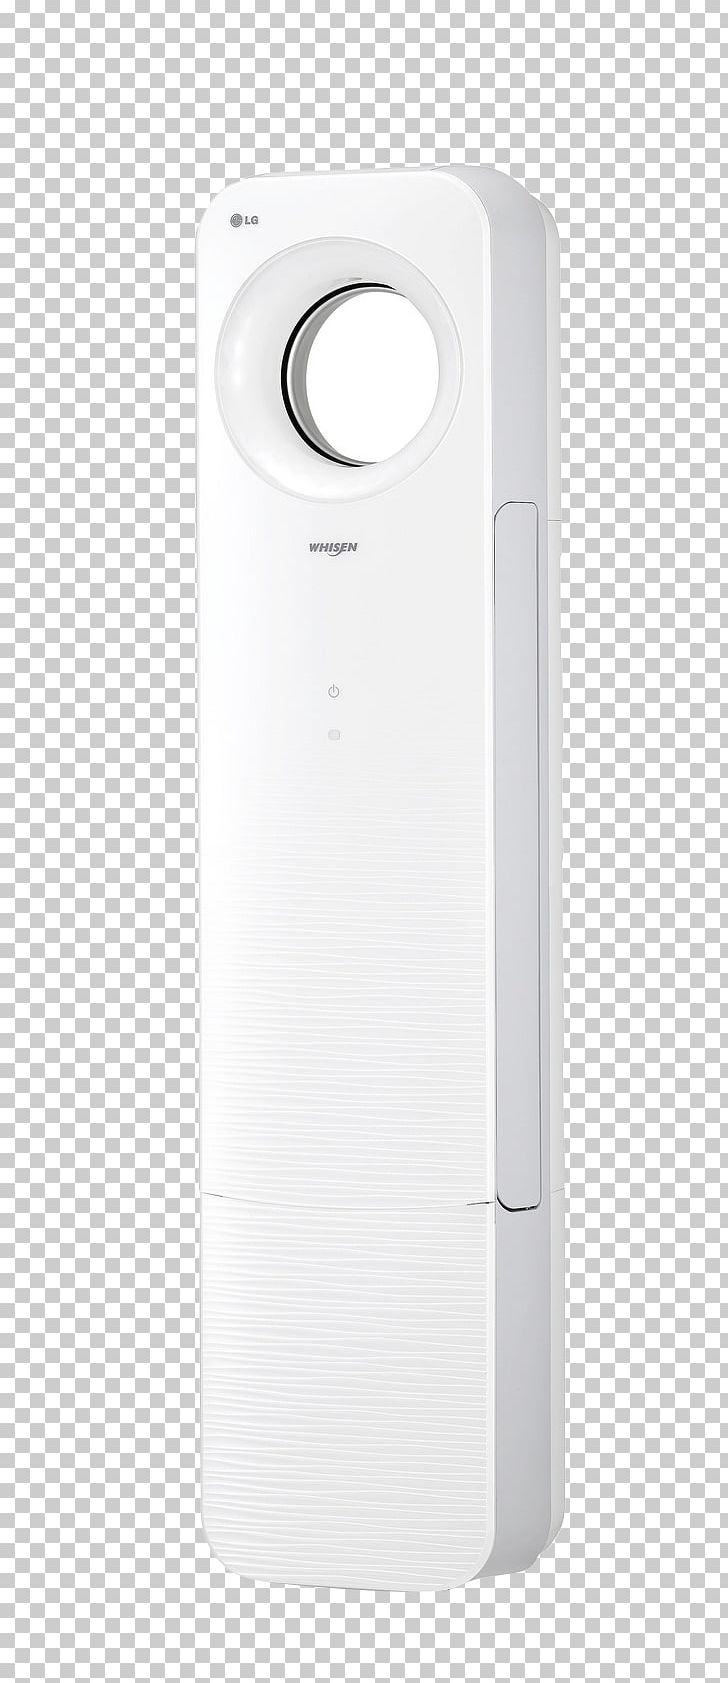 Feature Phone Mobile Phone PNG, Clipart, Air Condition, Air Conditional, Air Conditioning Fan, Air Conditioning Vector, Communication Free PNG Download